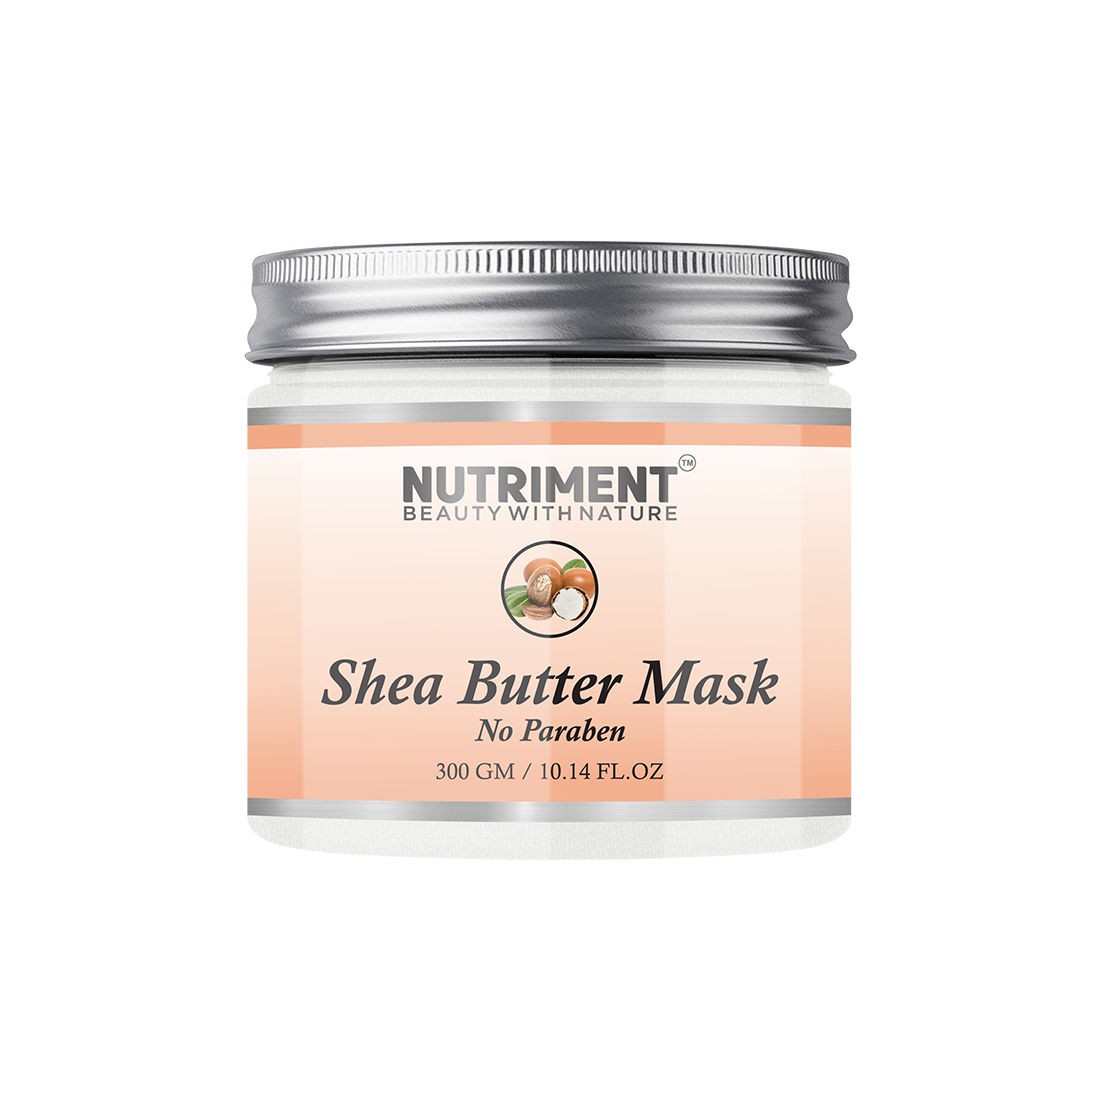 Nutriment Sheabutter Mask For Hydrating Skin Removing Oil And Improves